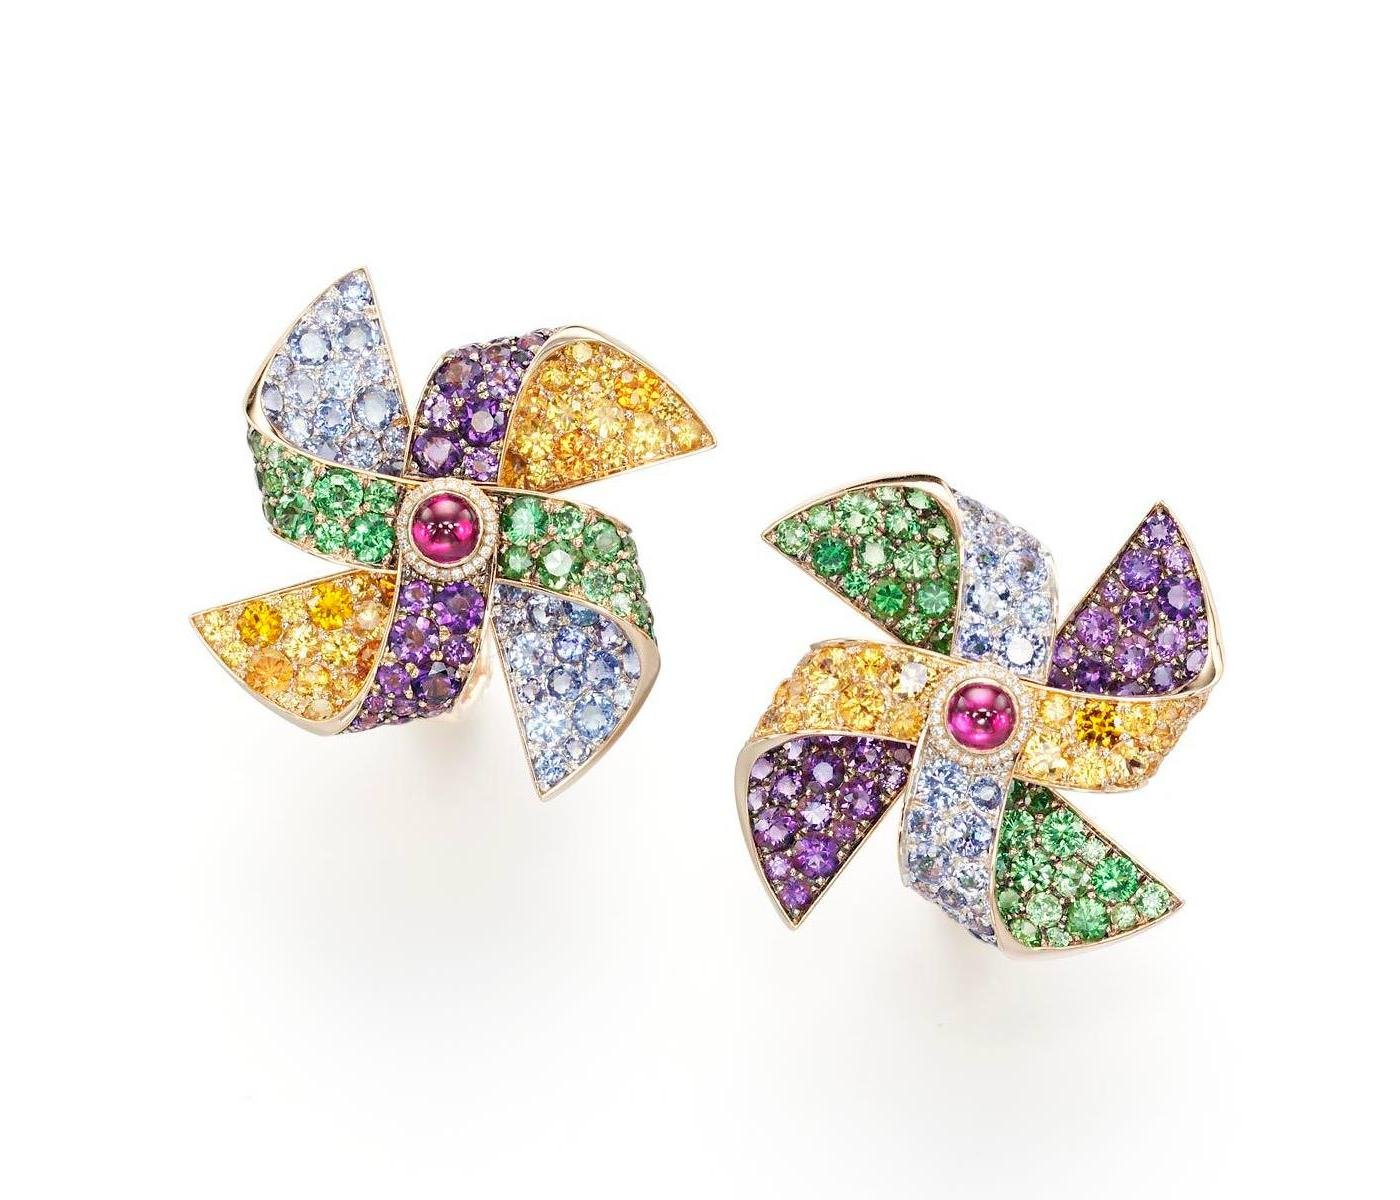 Earrings by Suzanne Syz